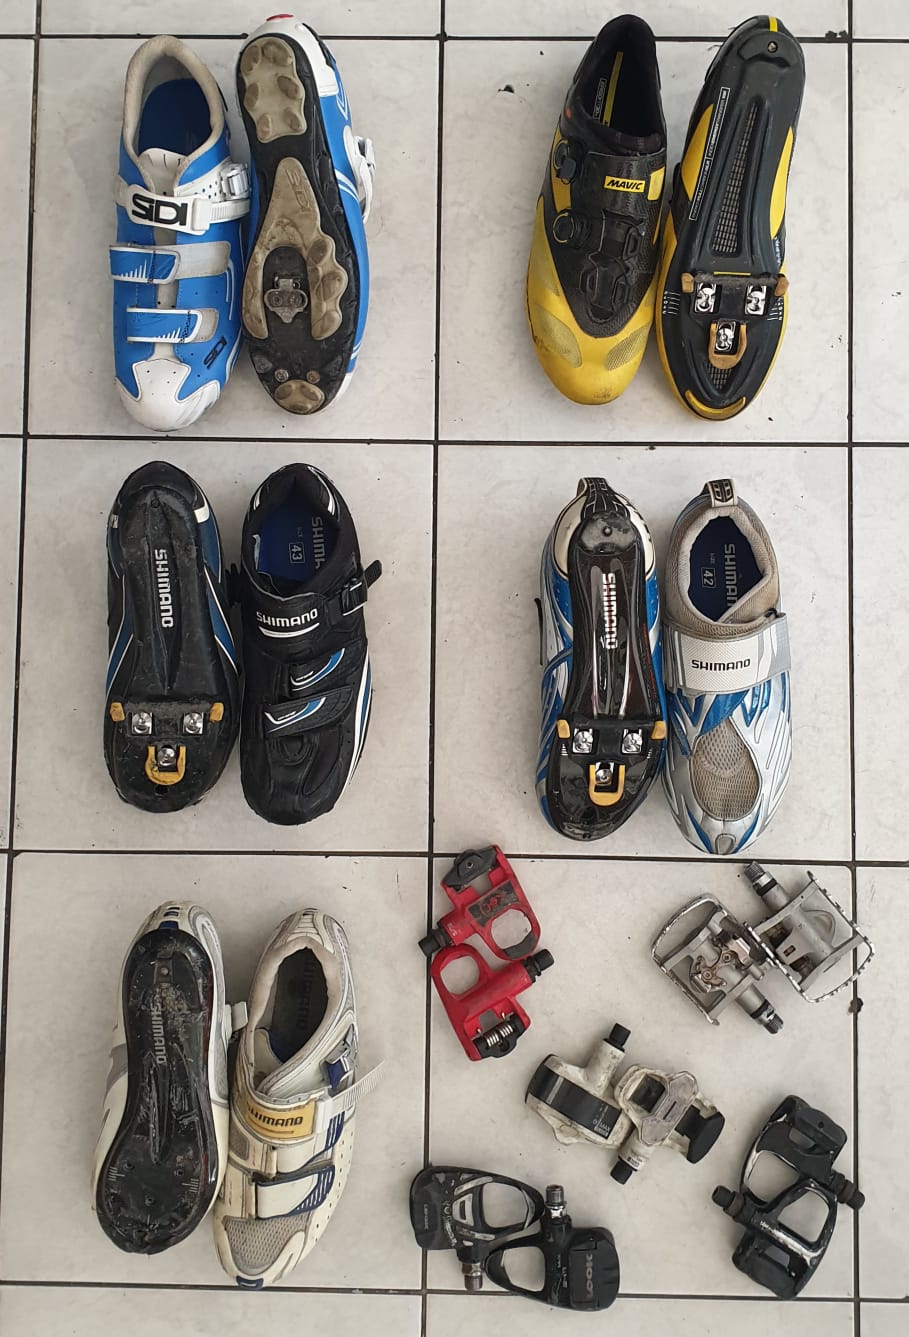 Pedals & Shoes for Shimano Look & Time